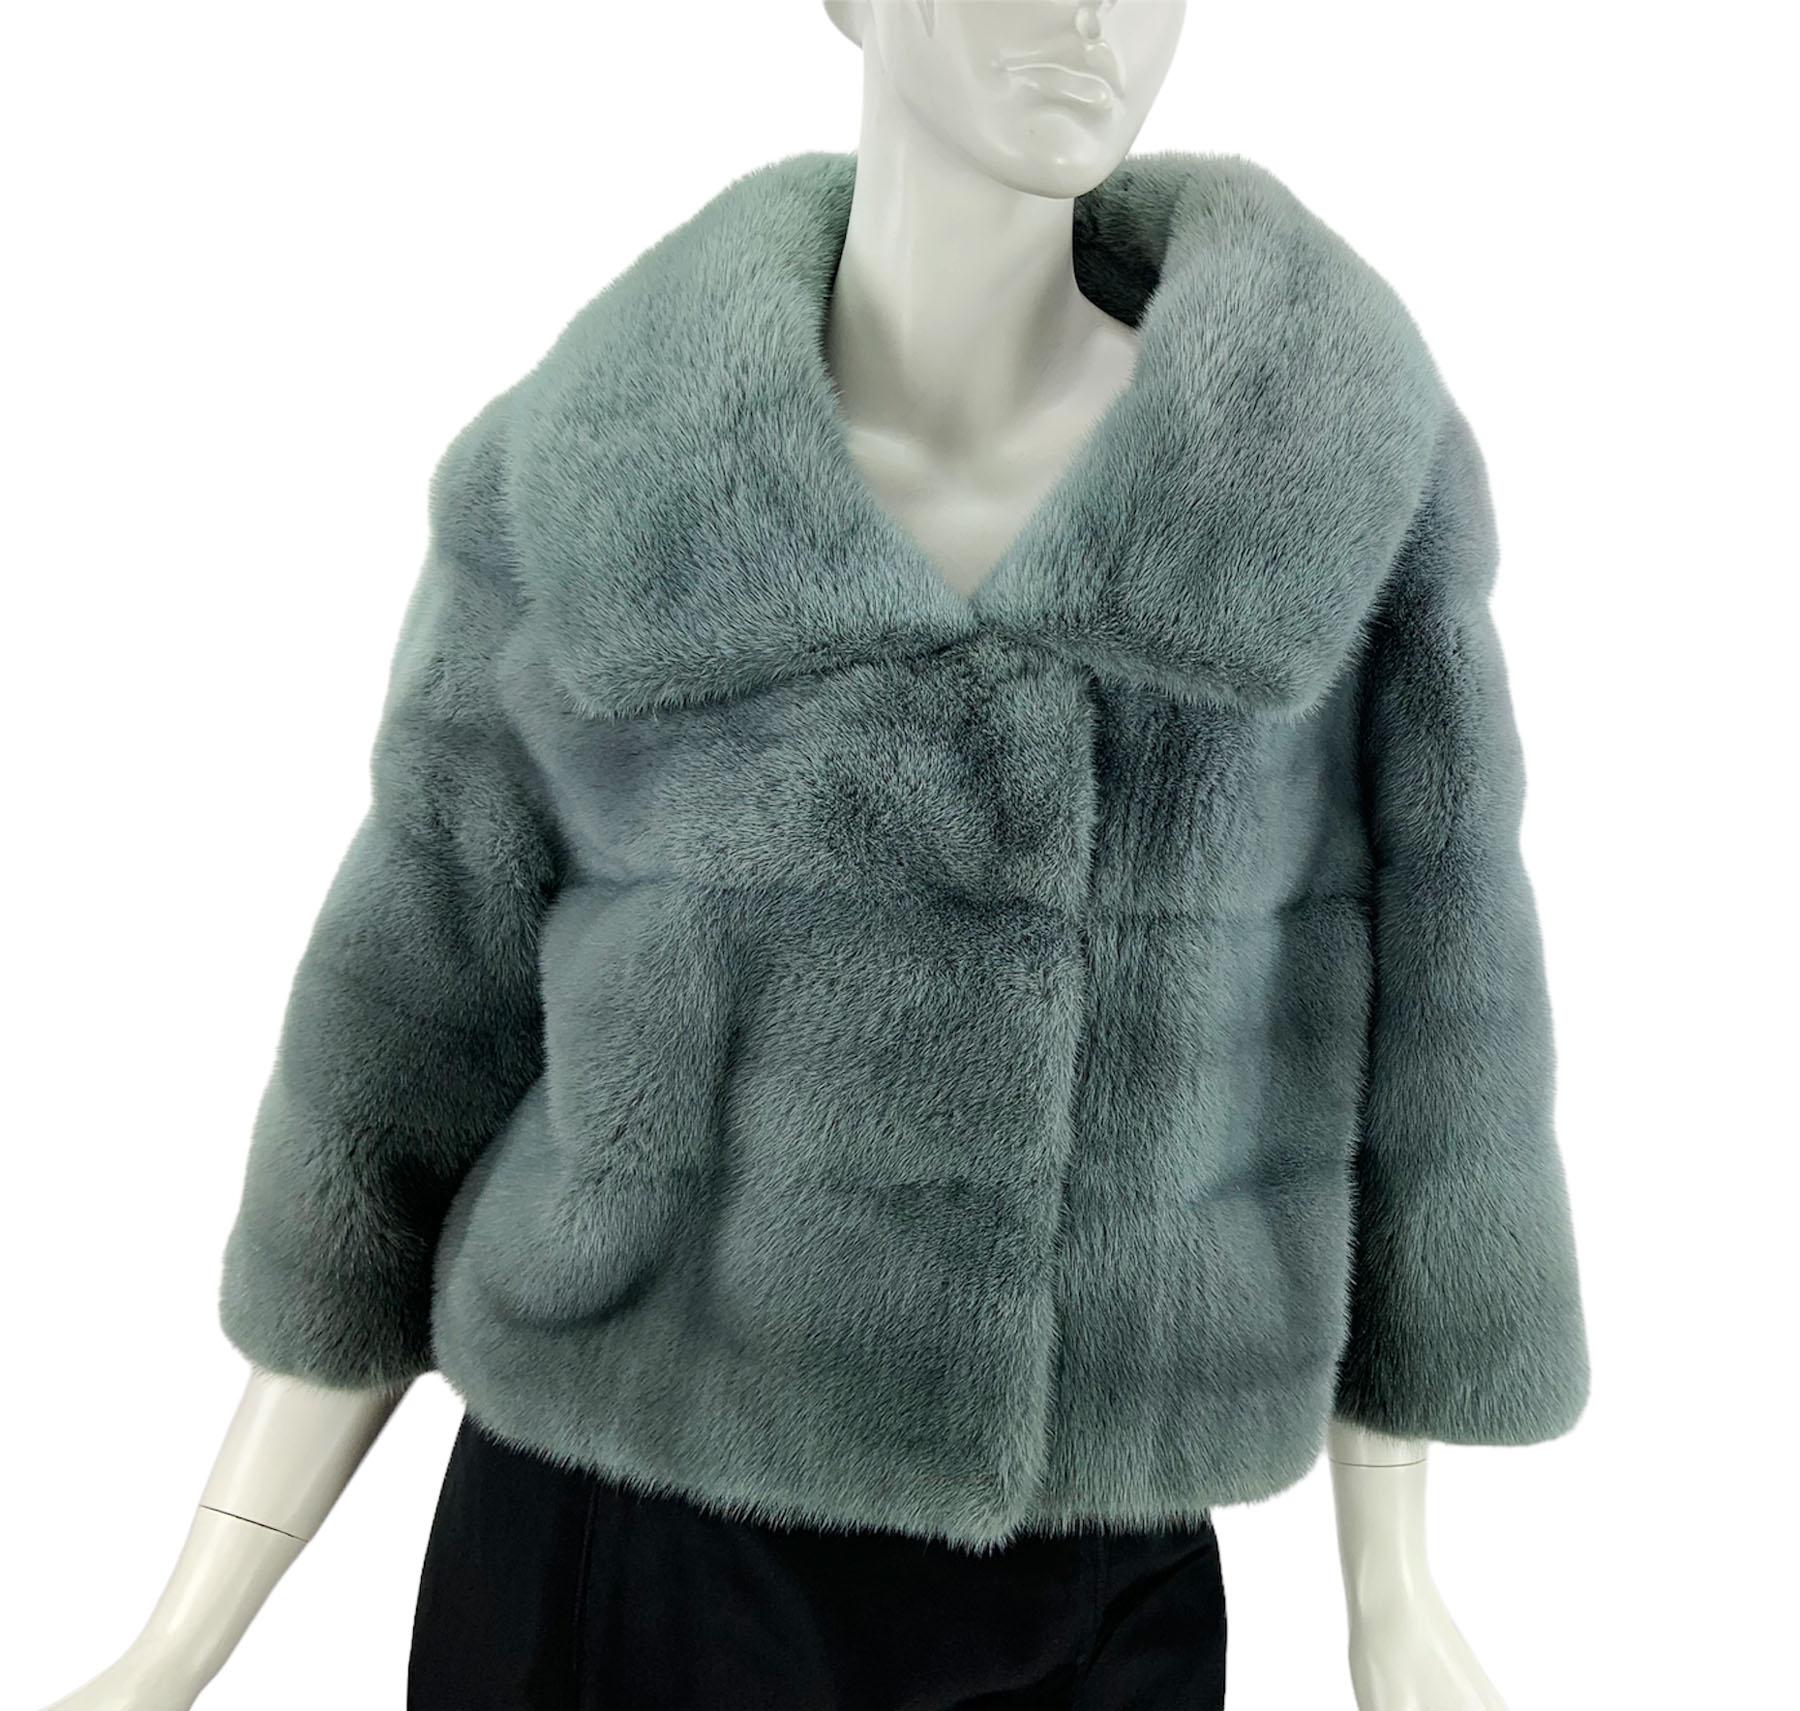 New Gucci Gray Blue Mink Cape Jacket
Italian size 38 ( will fit bigger sizes also)
100% Mink, Origin - Finland, Oversize Collar, Three Quarter Sleeve, Fully Lined in Silk, Hook and Eye Closure.
Measurements: Length - 19 inches, Sleeve - raglan 20